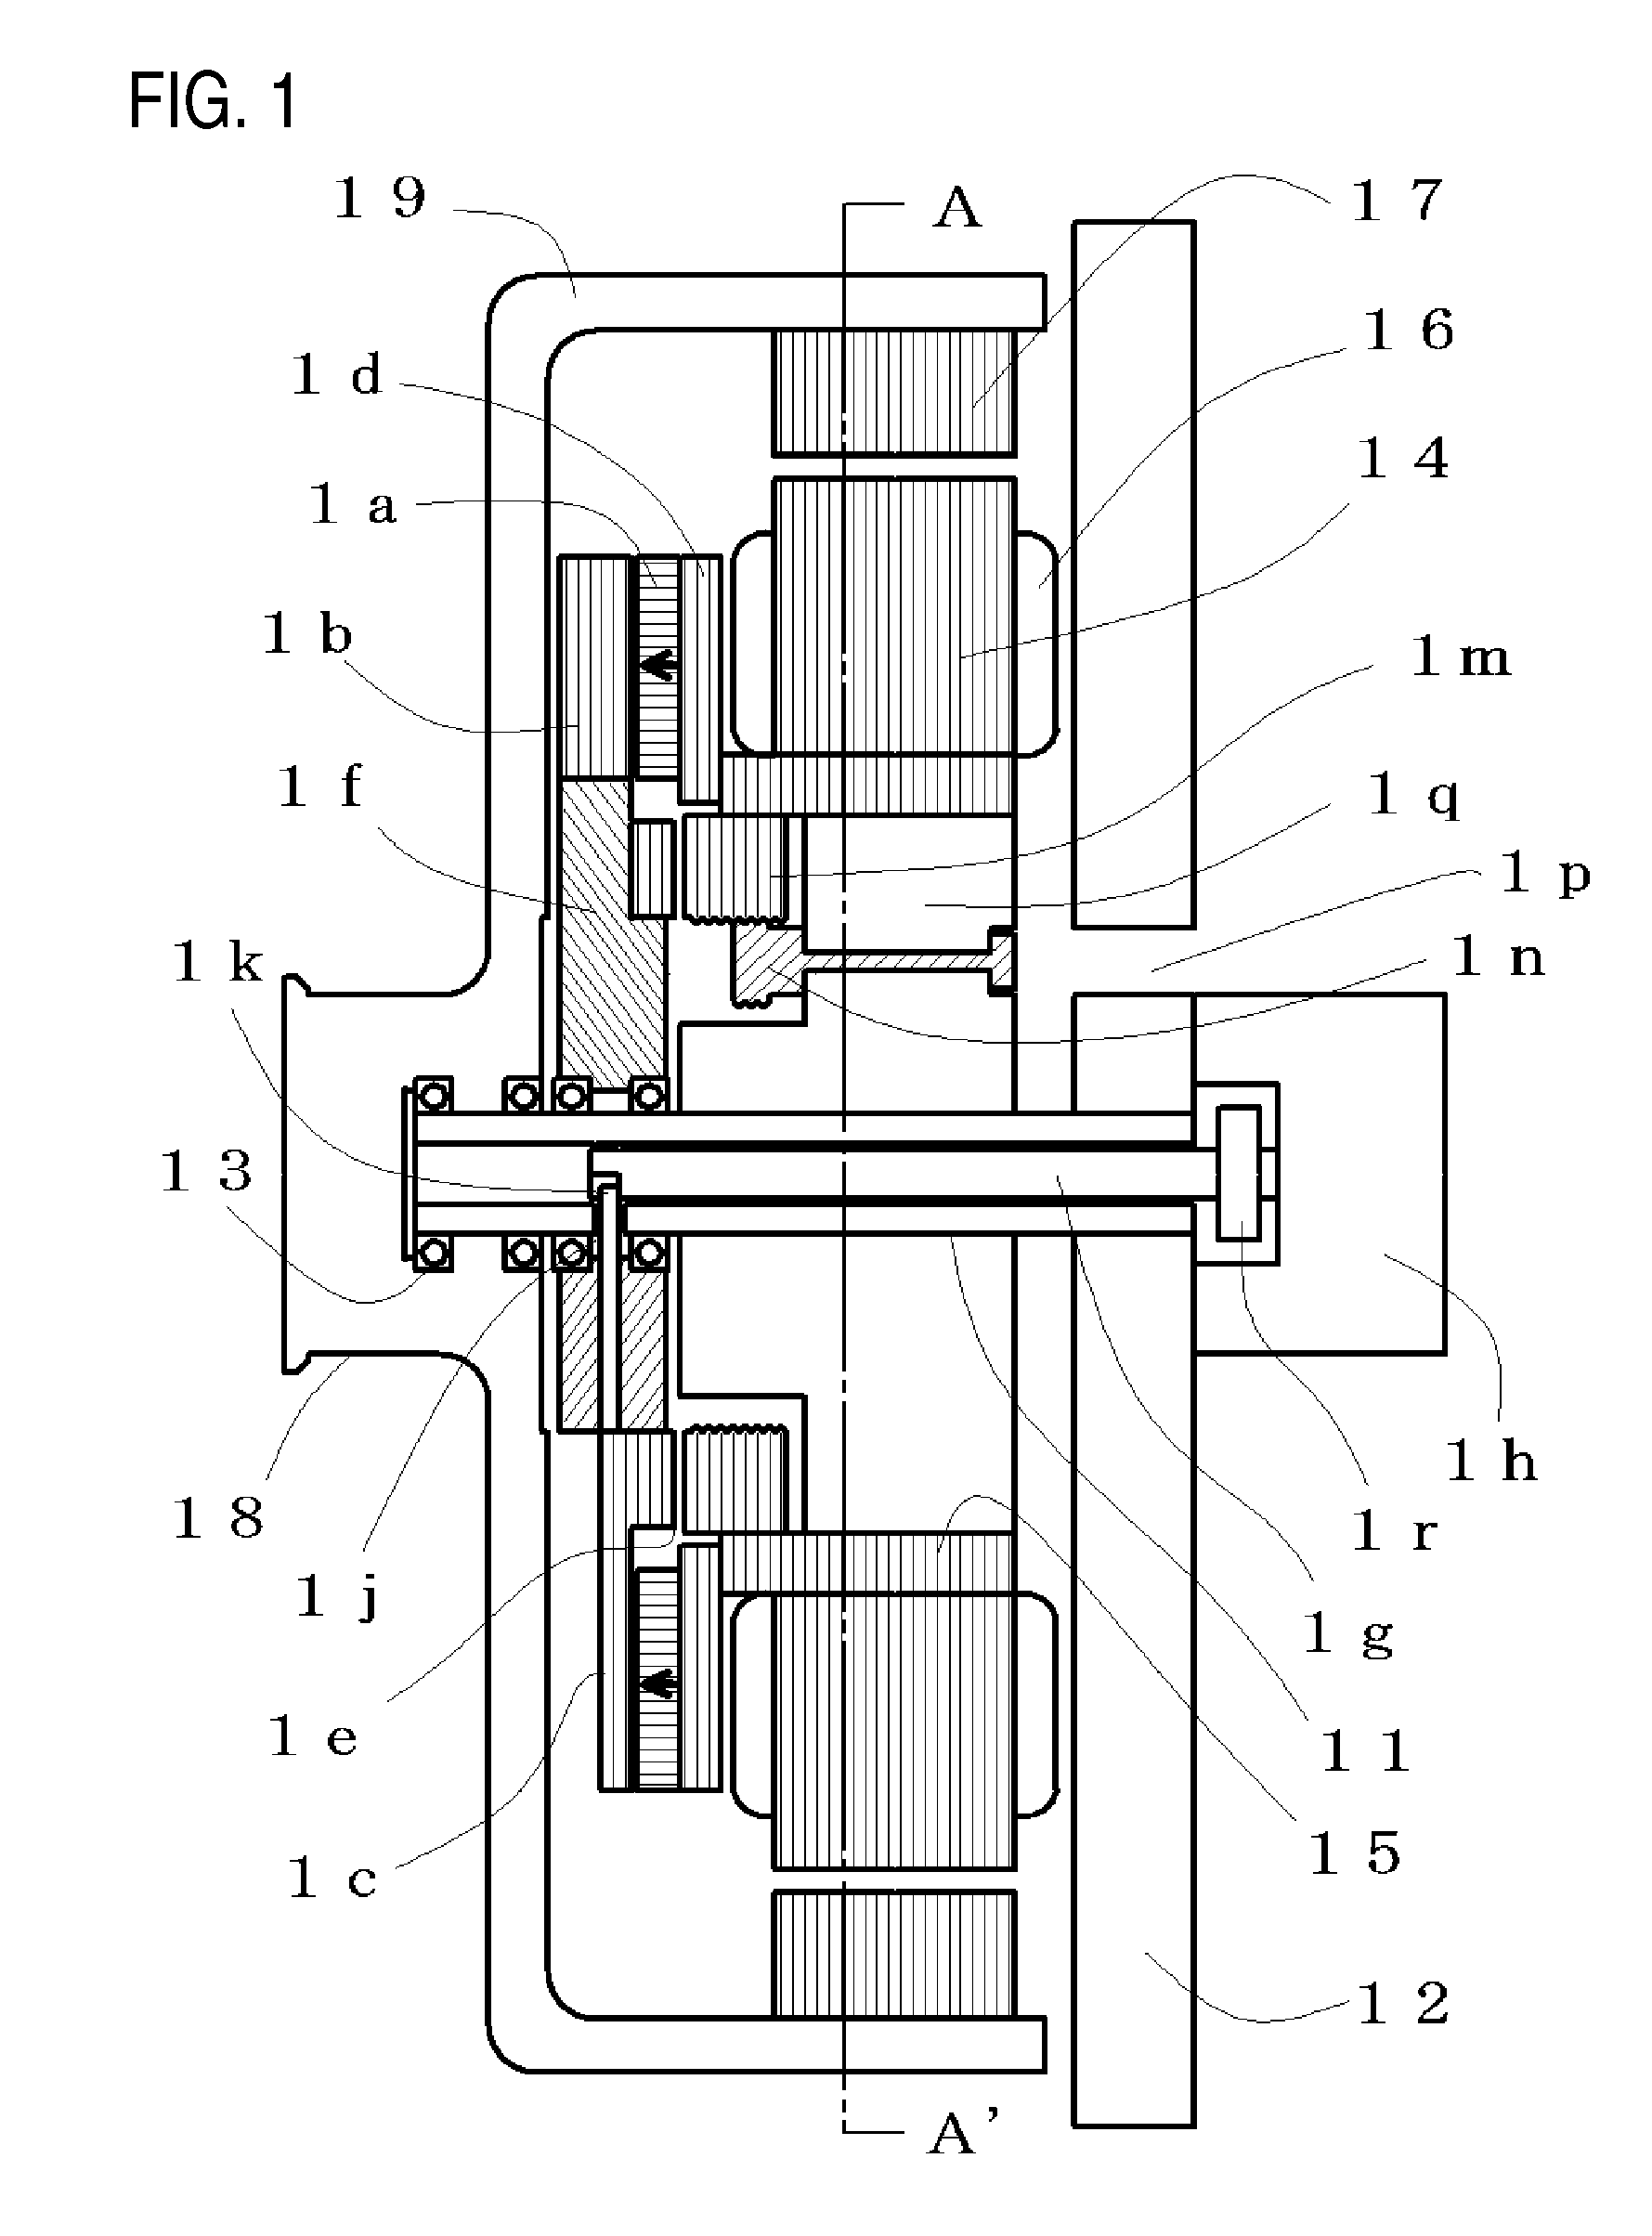 Field controllable rotating electric machine system with magnetic excitation part